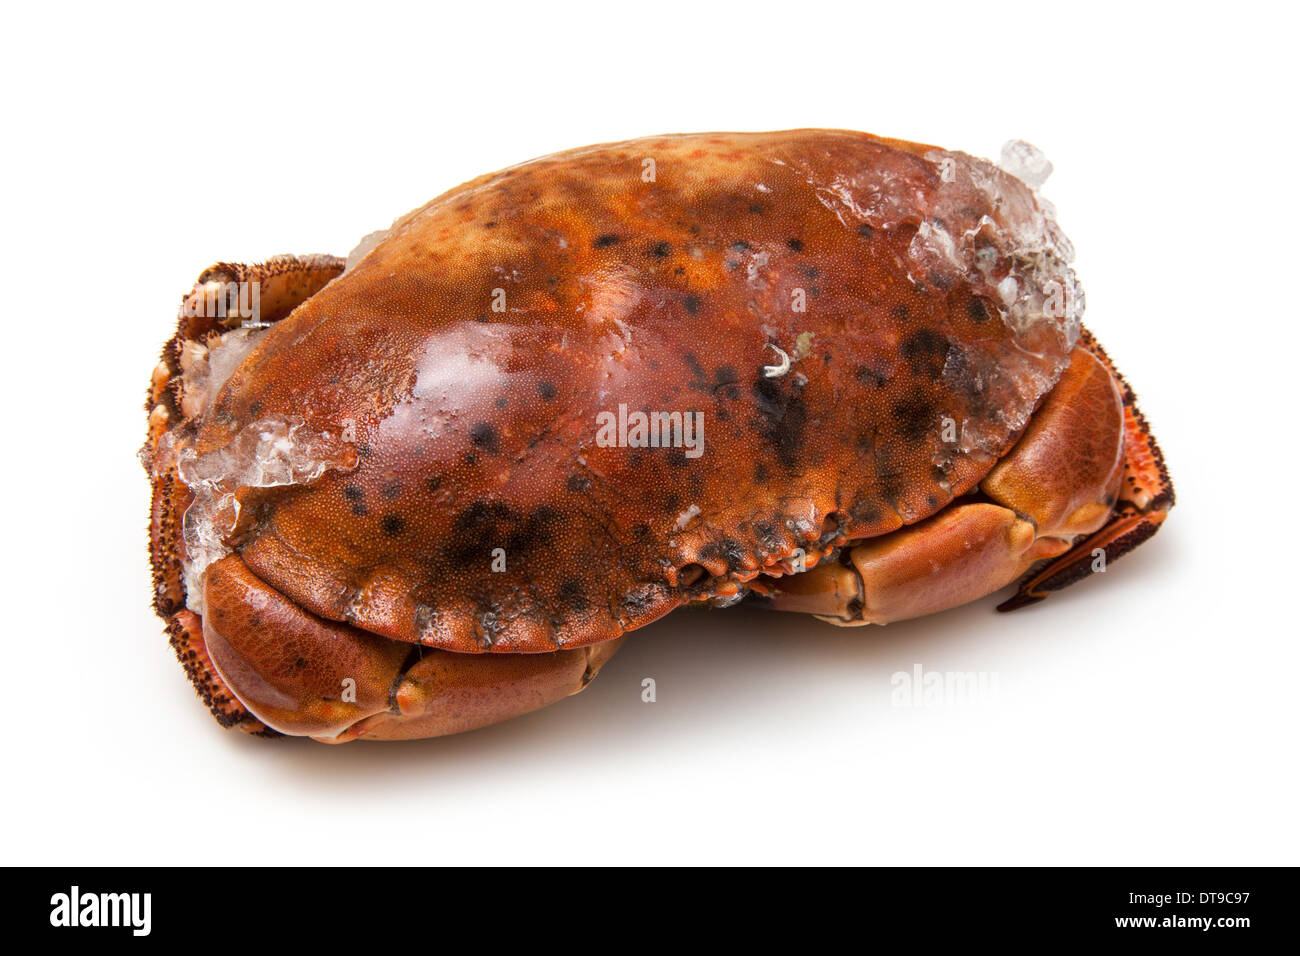 Frozen cooked edible brown crab, isolated on a white studio background. Stock Photo